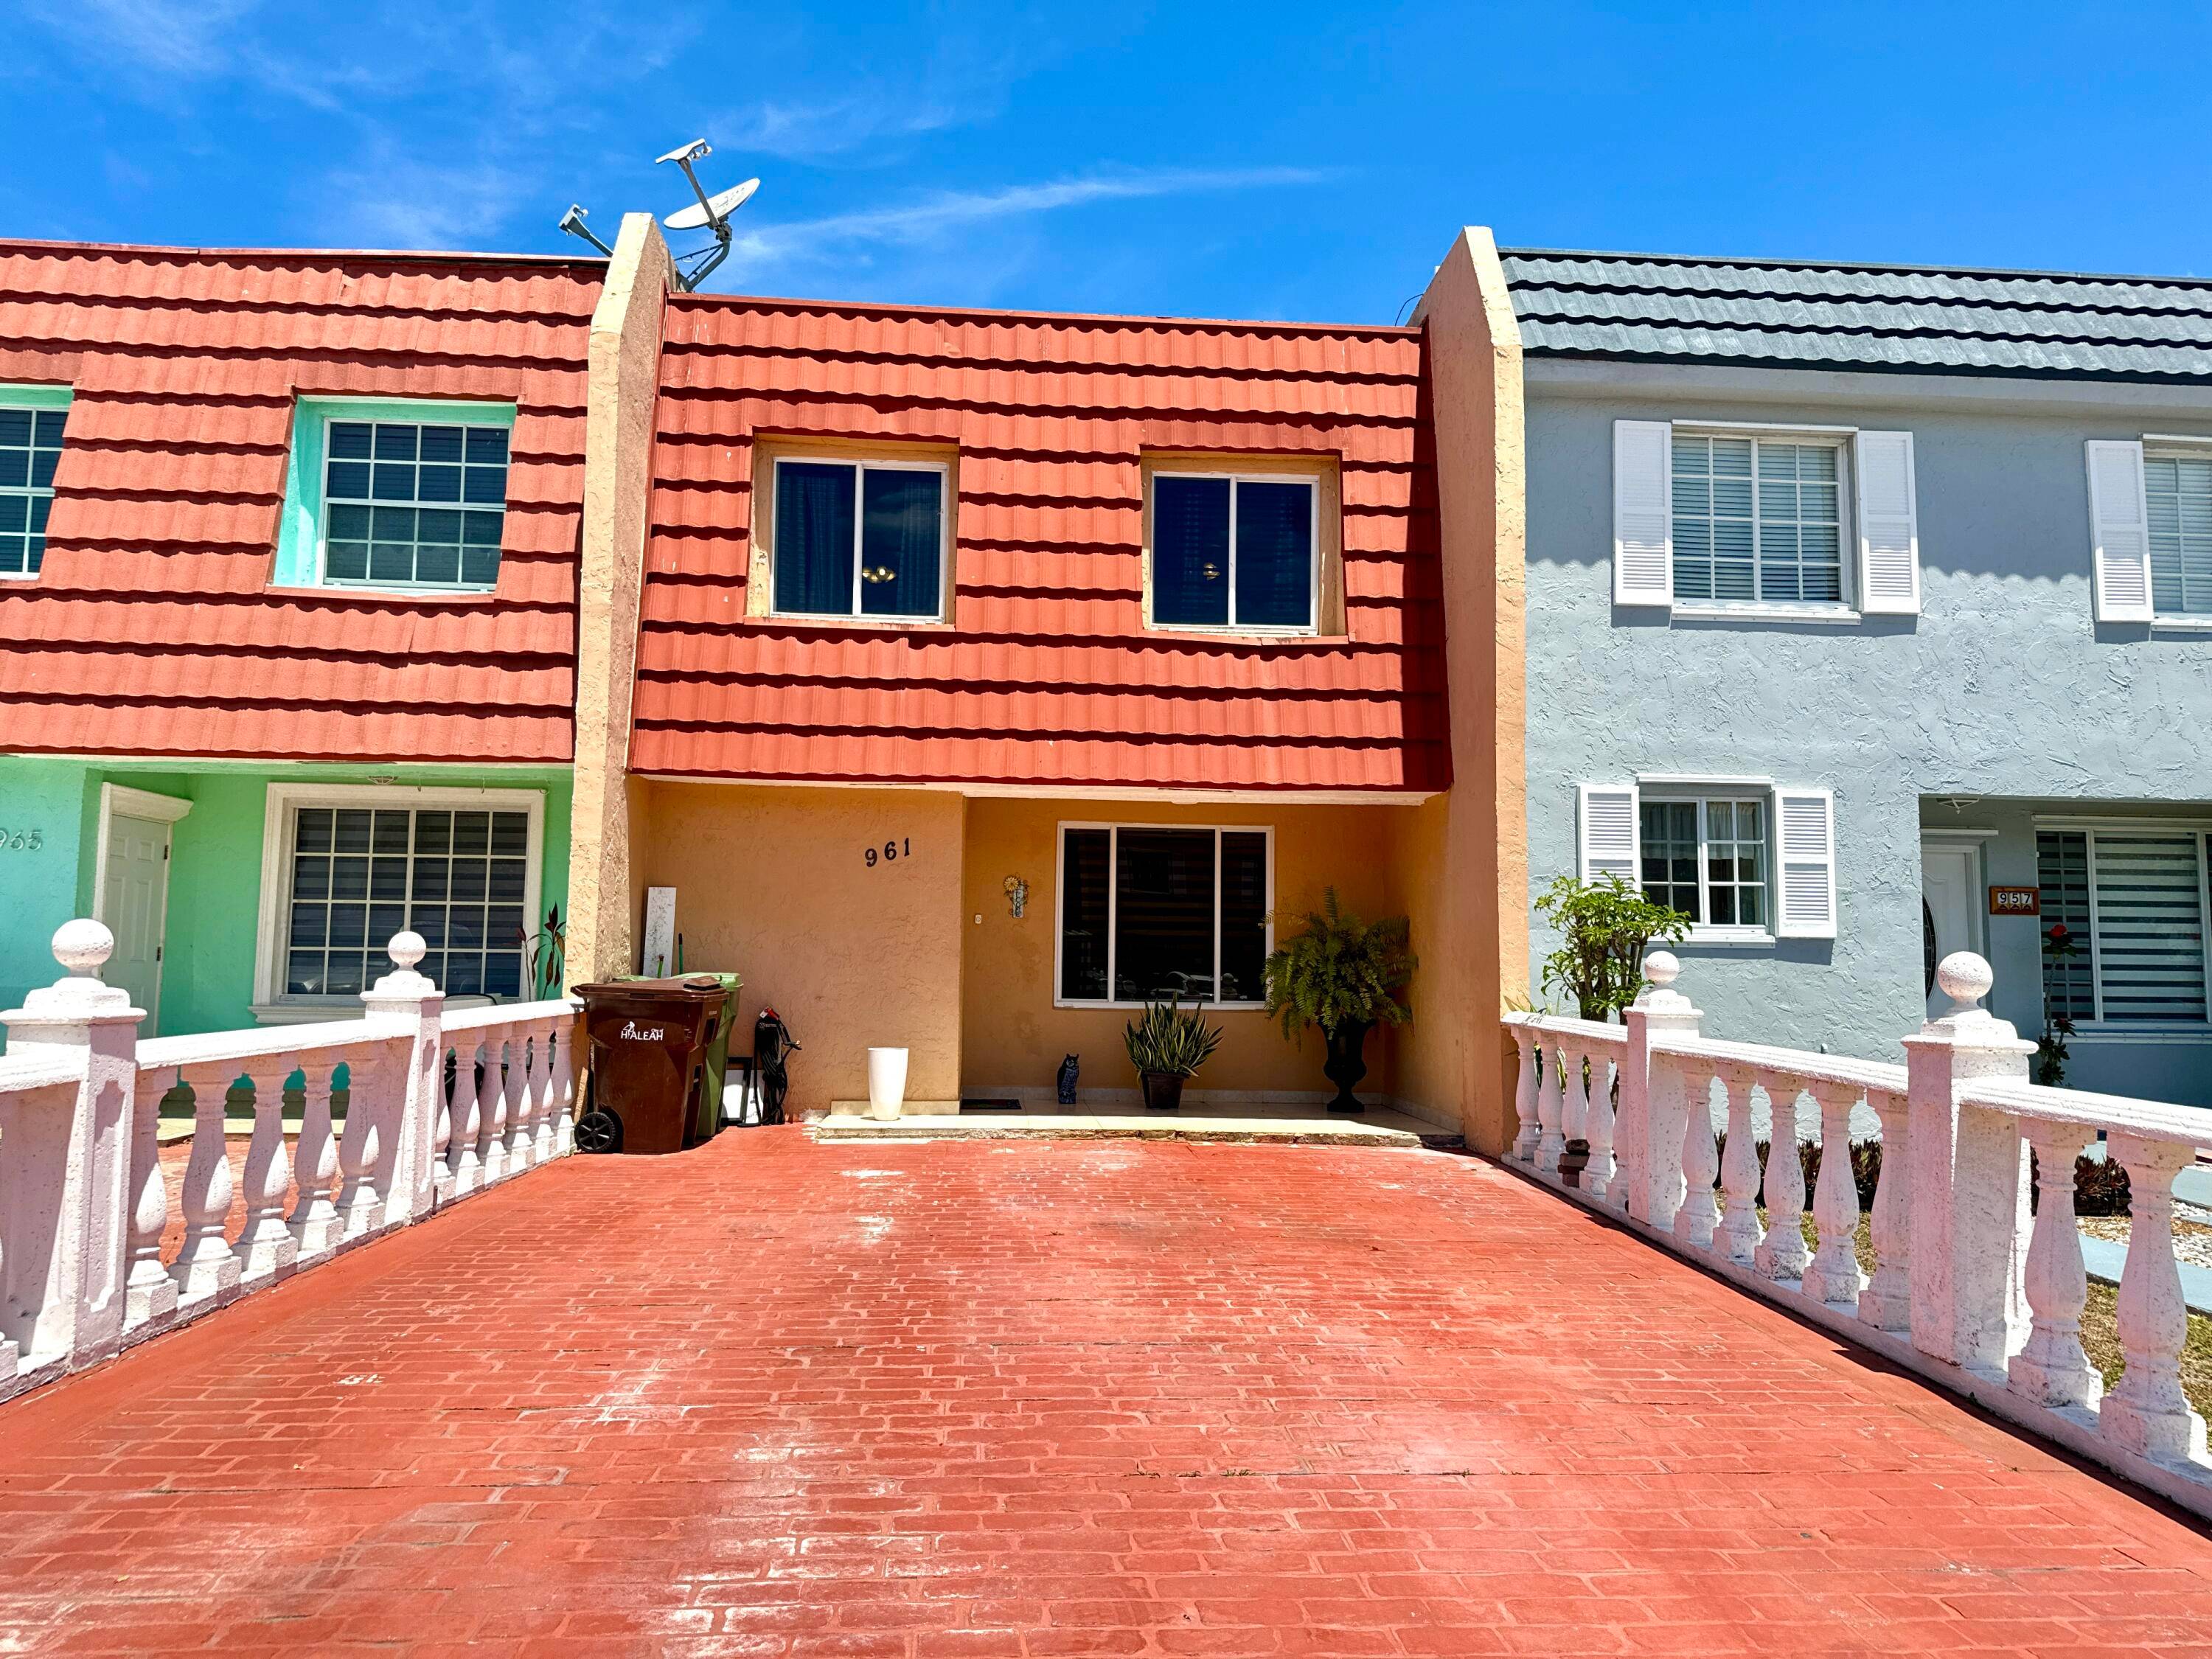 Gorgeous townhouse located in the heart of the City of Hialeah, only minutes from restaurants, shopping centers, and highways.